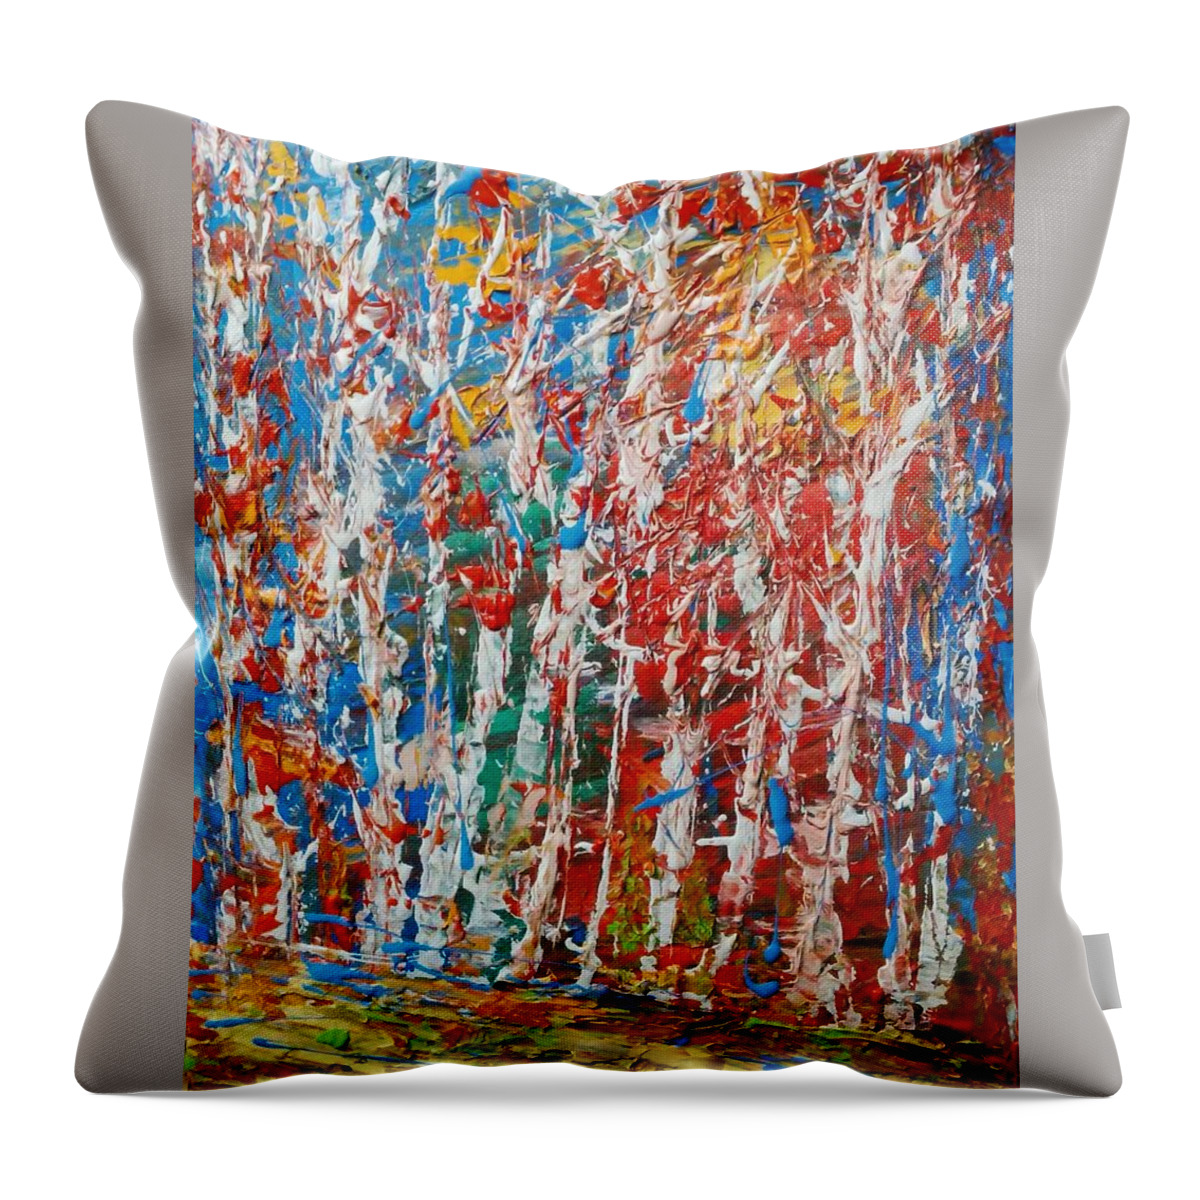 Abstract Landscape Painting Throw Pillow featuring the painting Birch Forest Abstract No.2 by Desmond Raymond